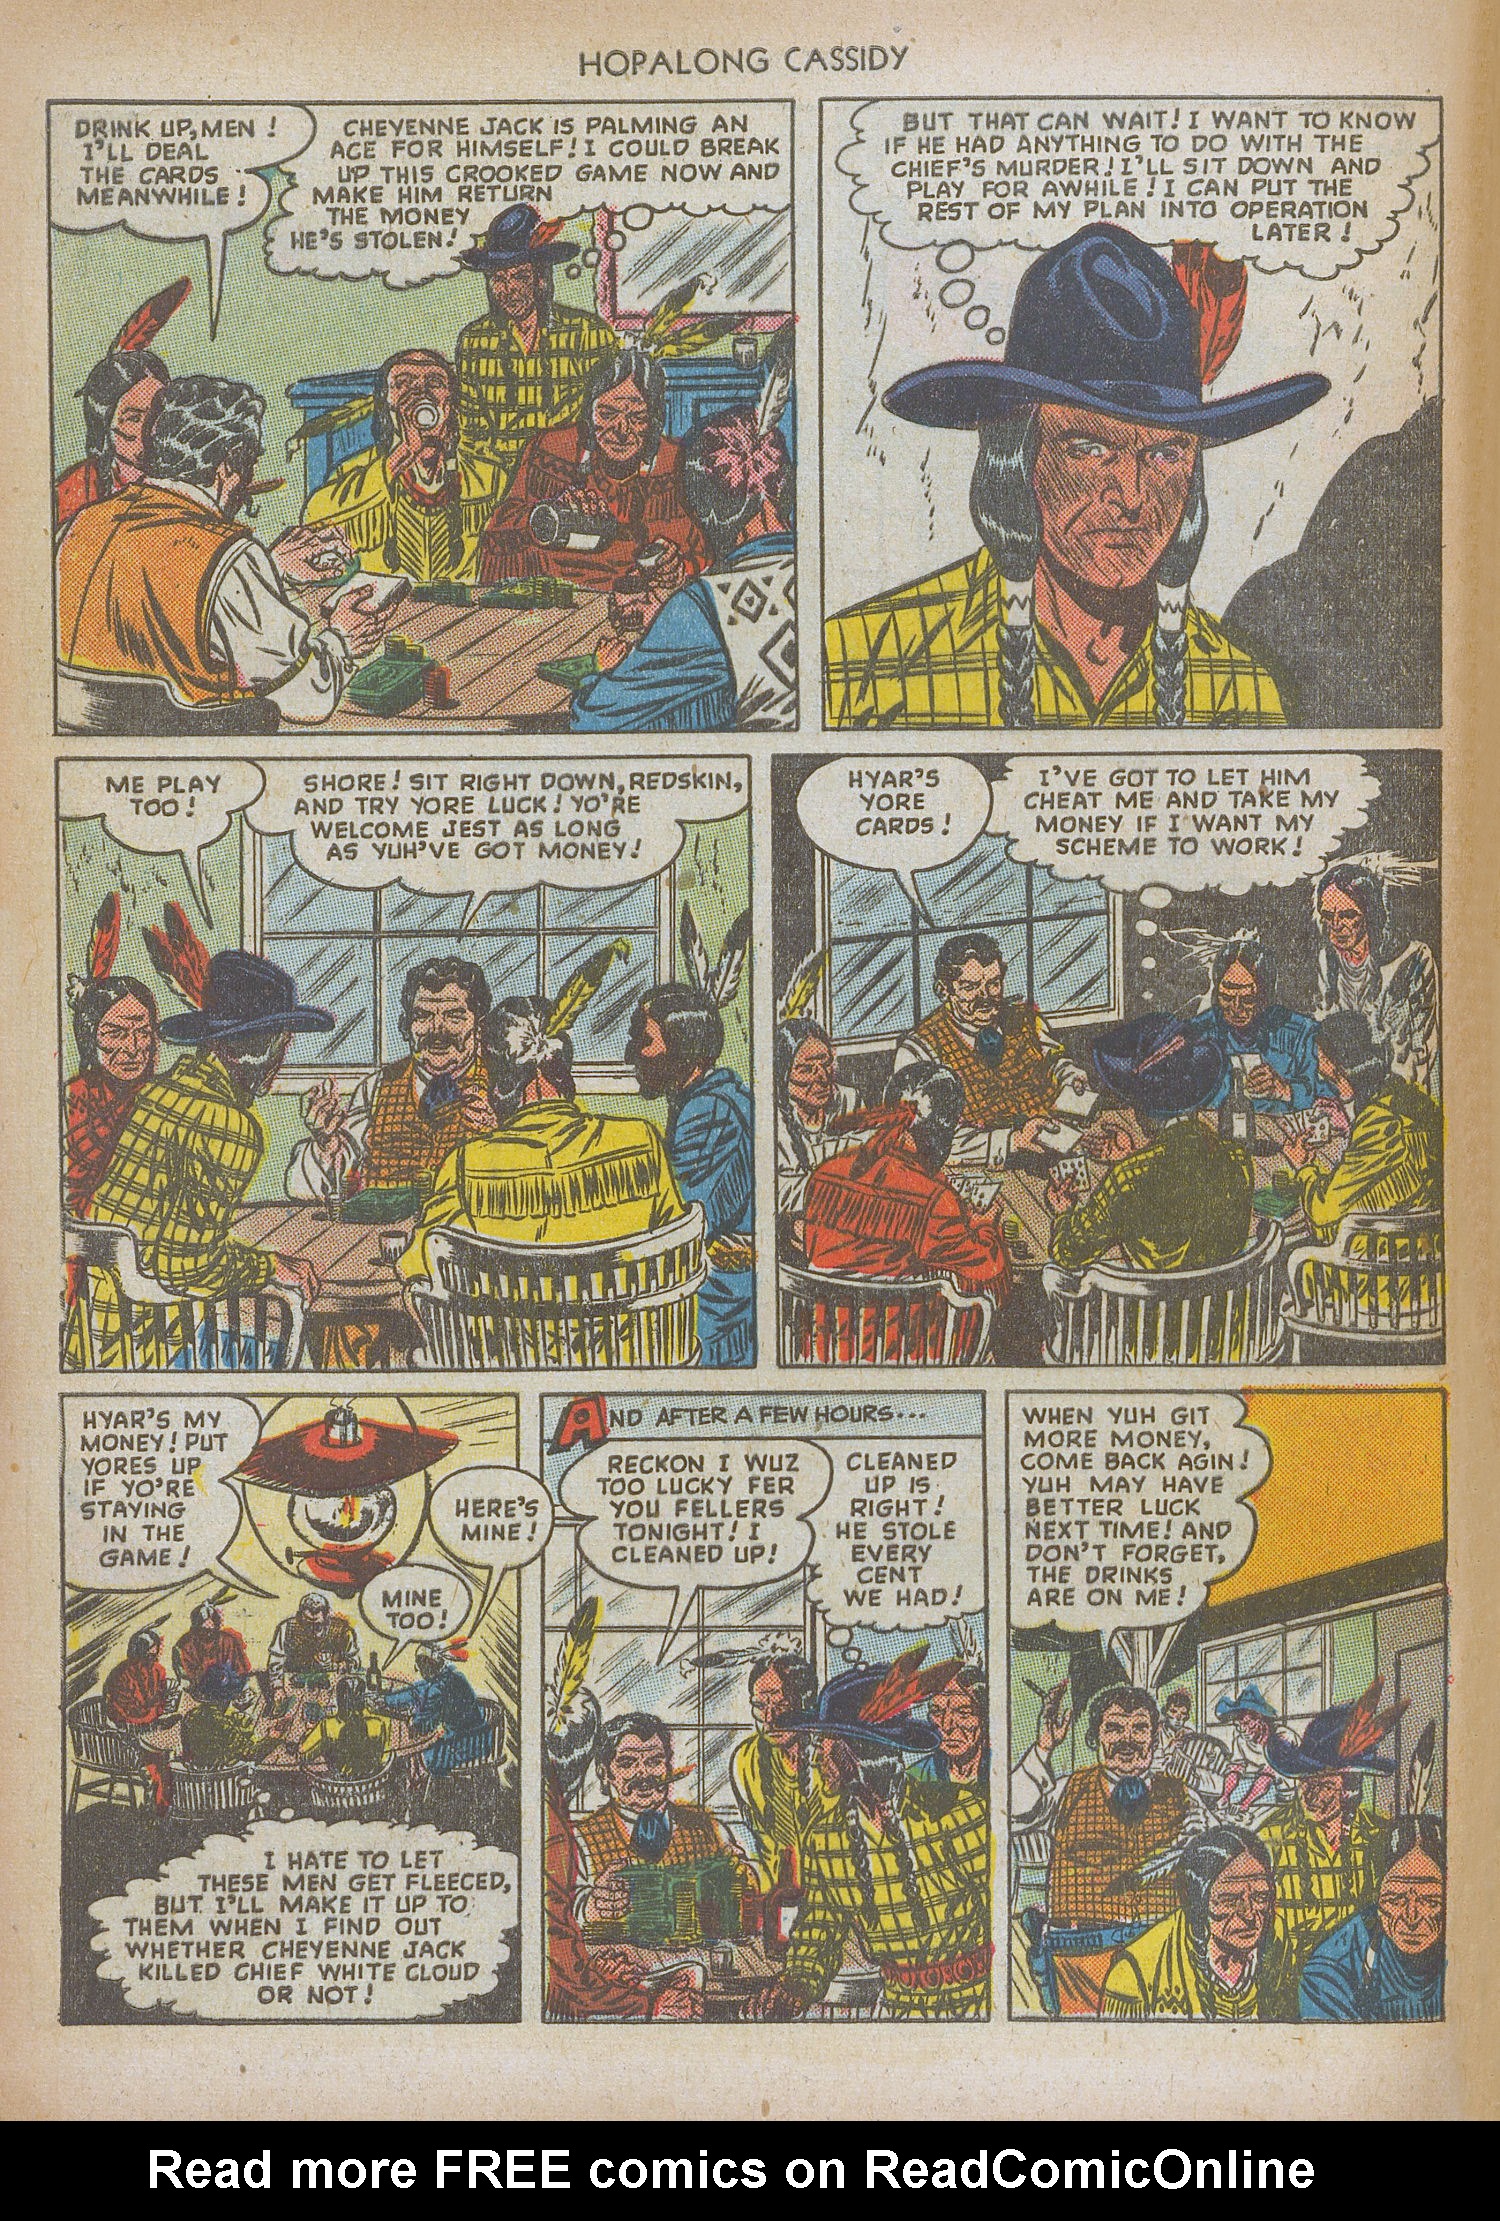 Read online Hopalong Cassidy comic -  Issue #35 - 8